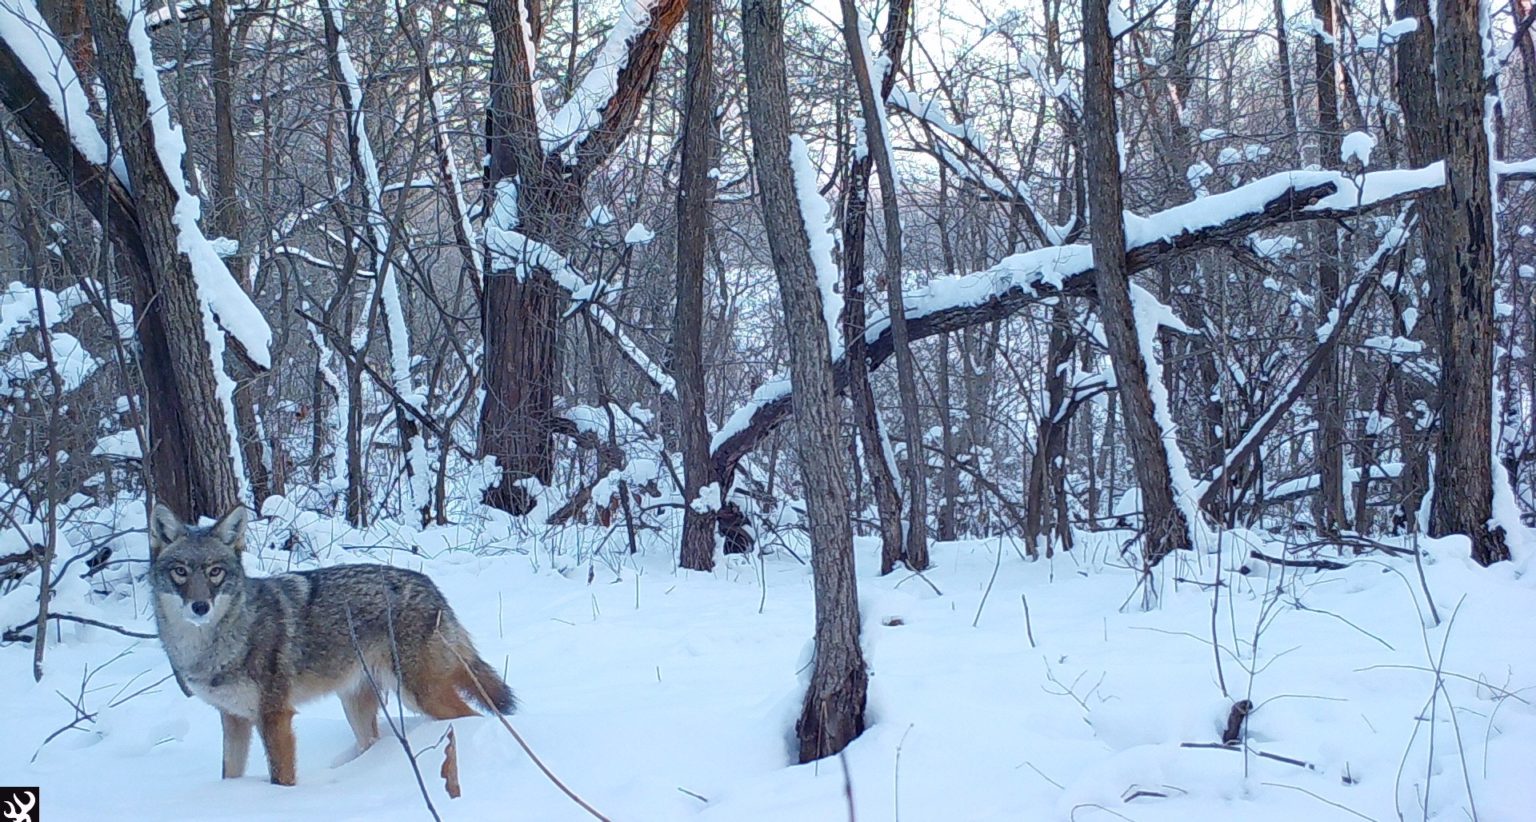 Coyote in the snowy woods